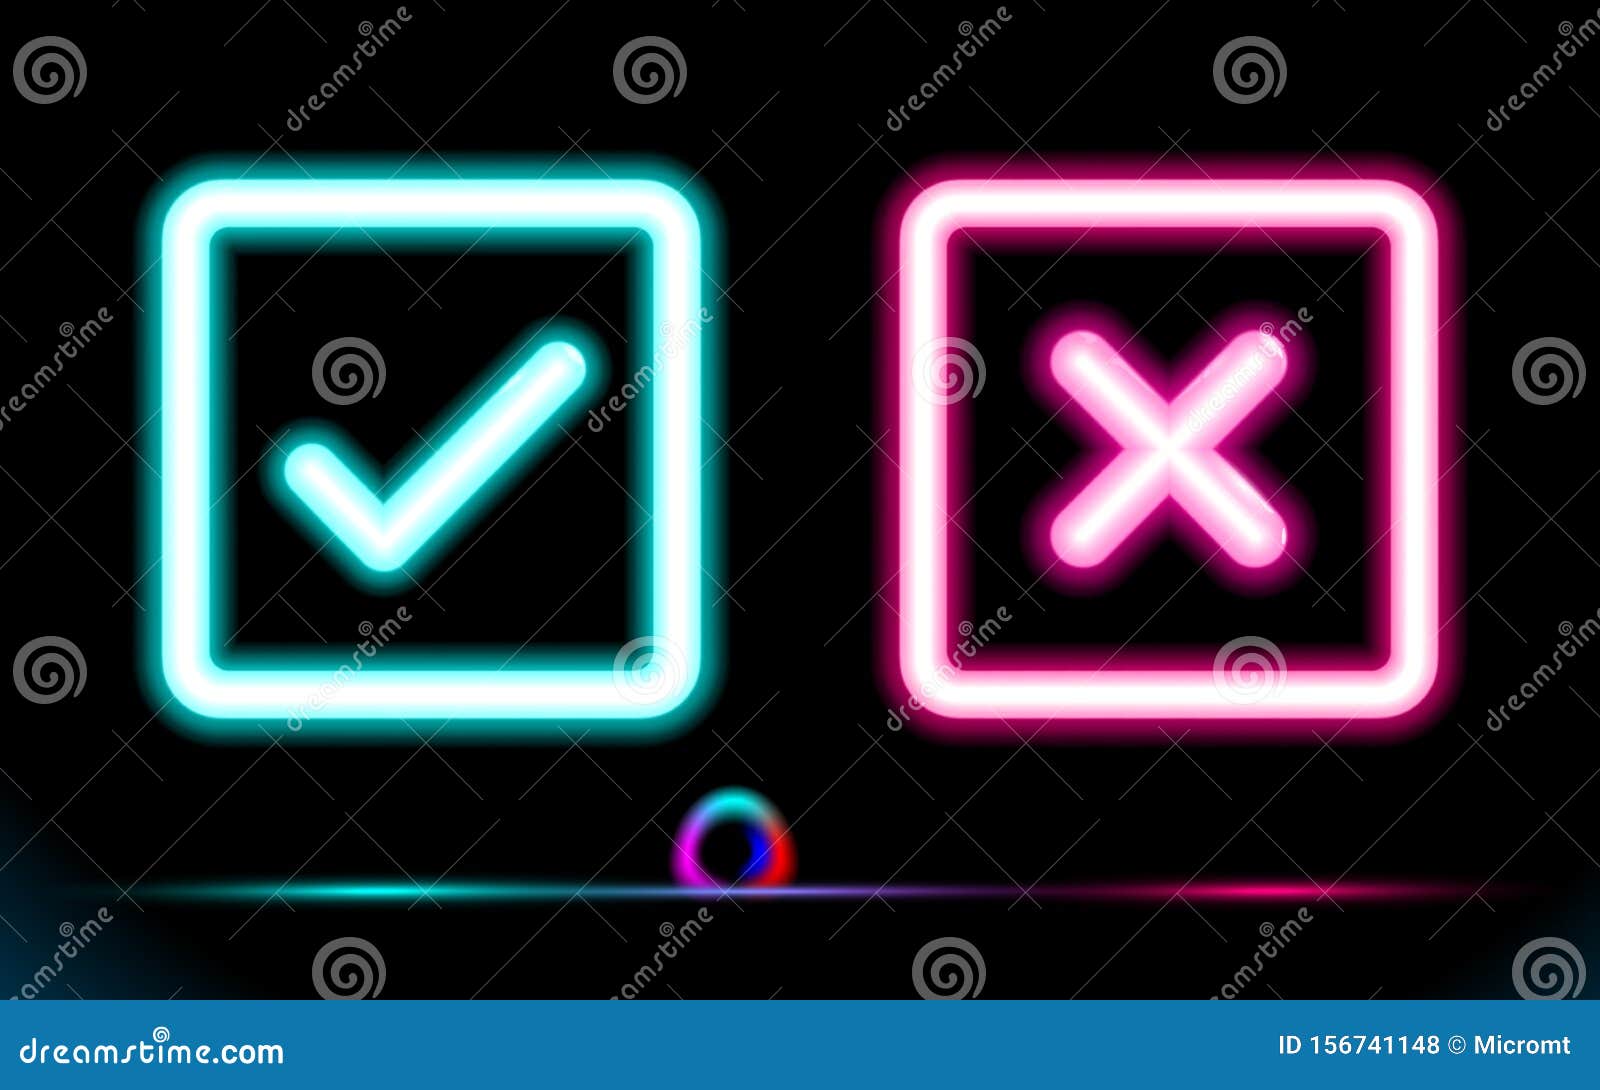 Neon Set Blue Lamp Checkmark with Pink Crosshair Icons in a Square. Tick,  Cross Symbols. Modern Ui Stock Vector - Illustration of bright, crosshair:  156741148